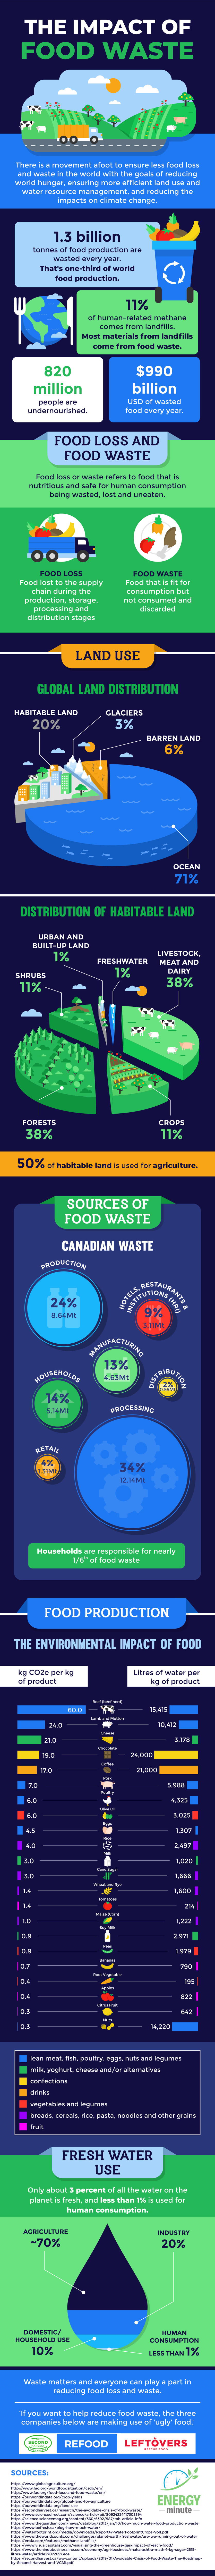 The Impact of Food Waste